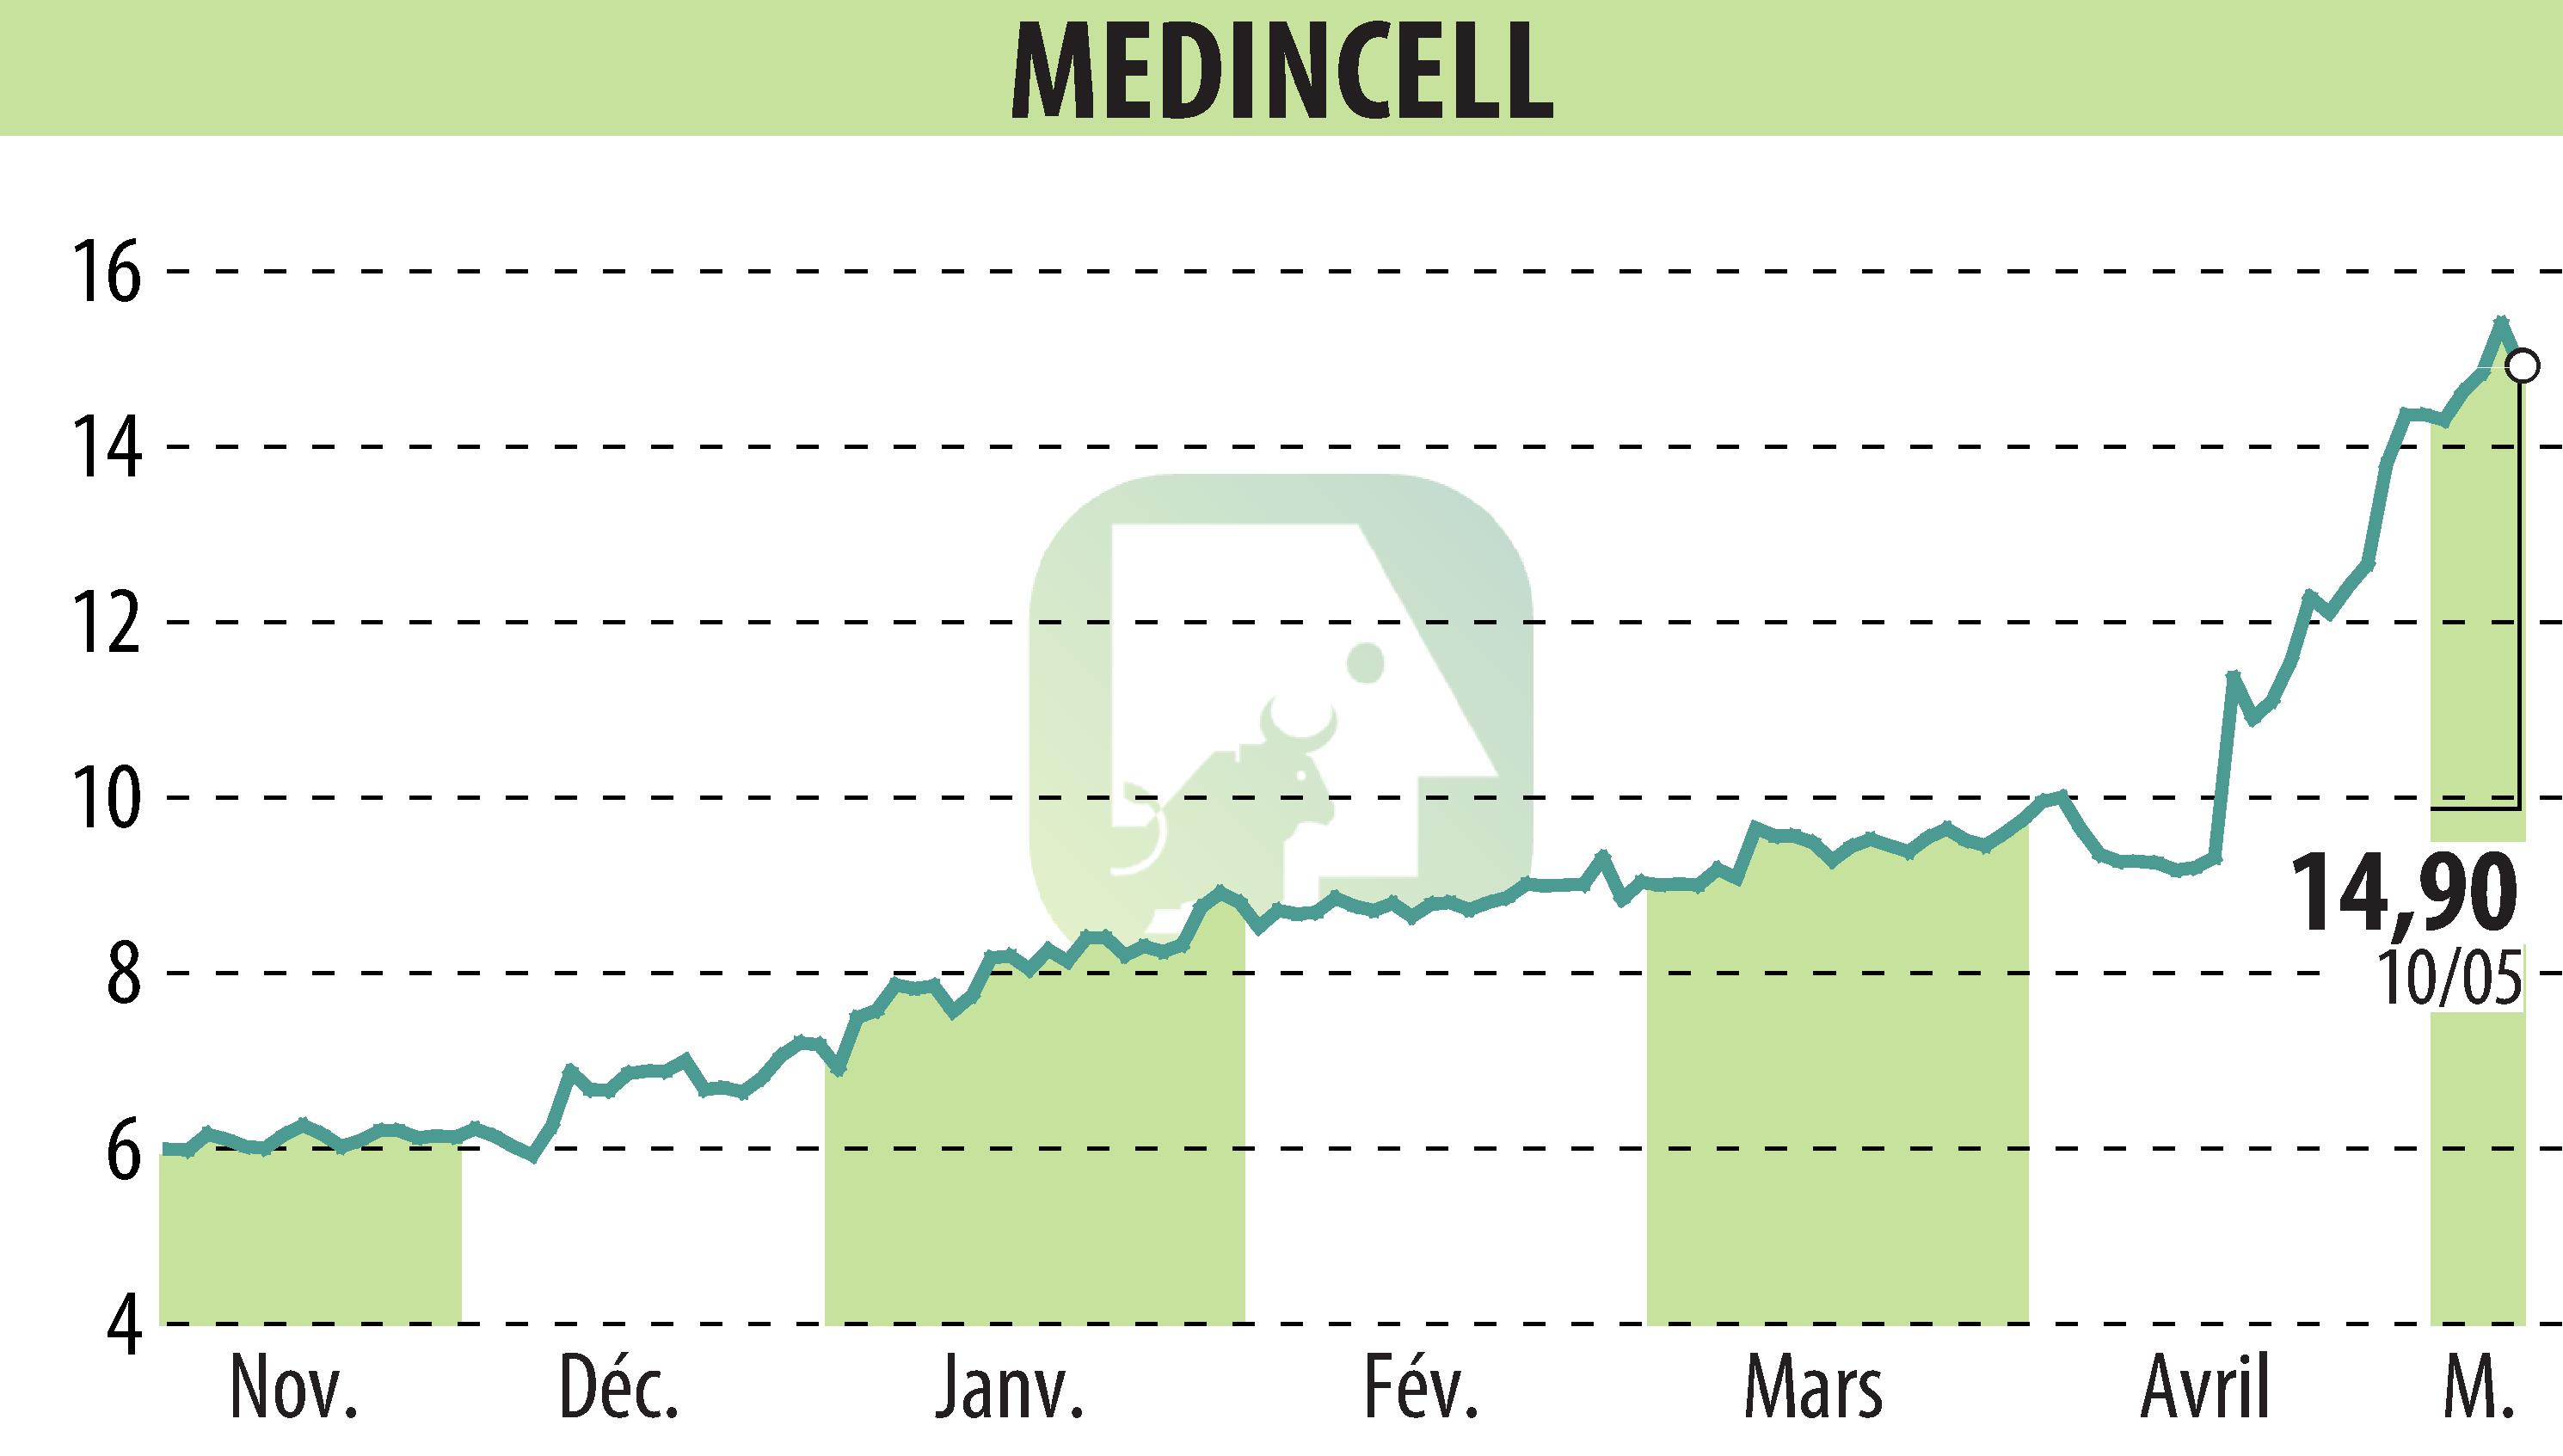 Stock price chart of MEDINCELL (EPA:MEDCL) showing fluctuations.